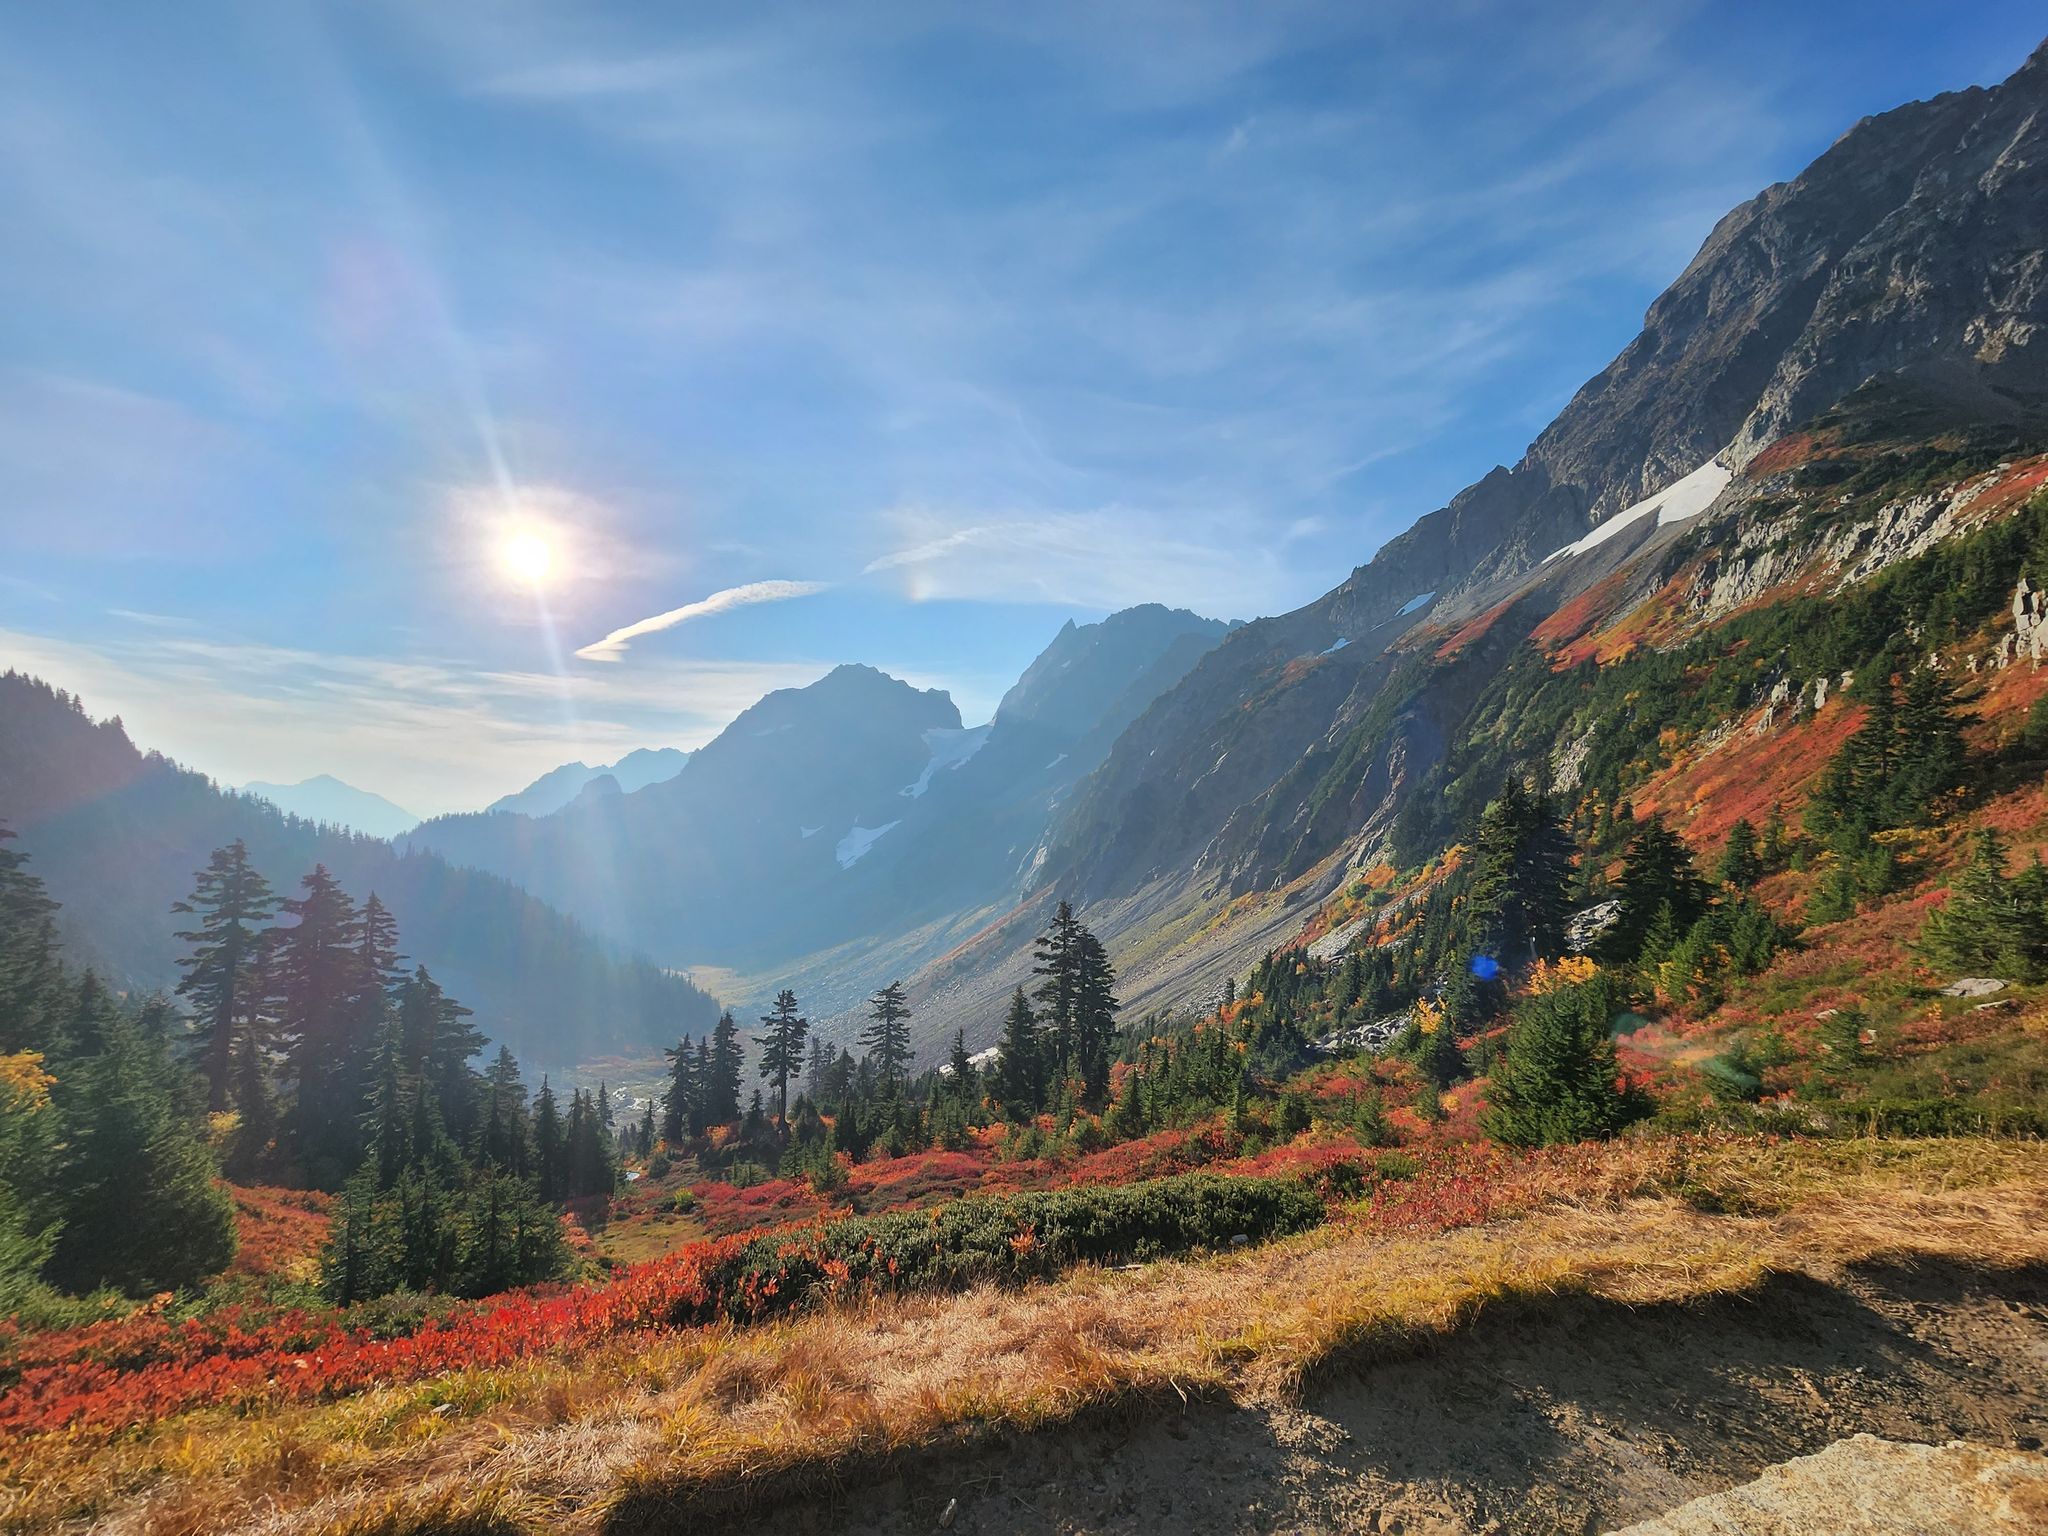 Fall colors at Cascade Pass cannot be beaten. One of the most popular hikes in North Cascades National Park